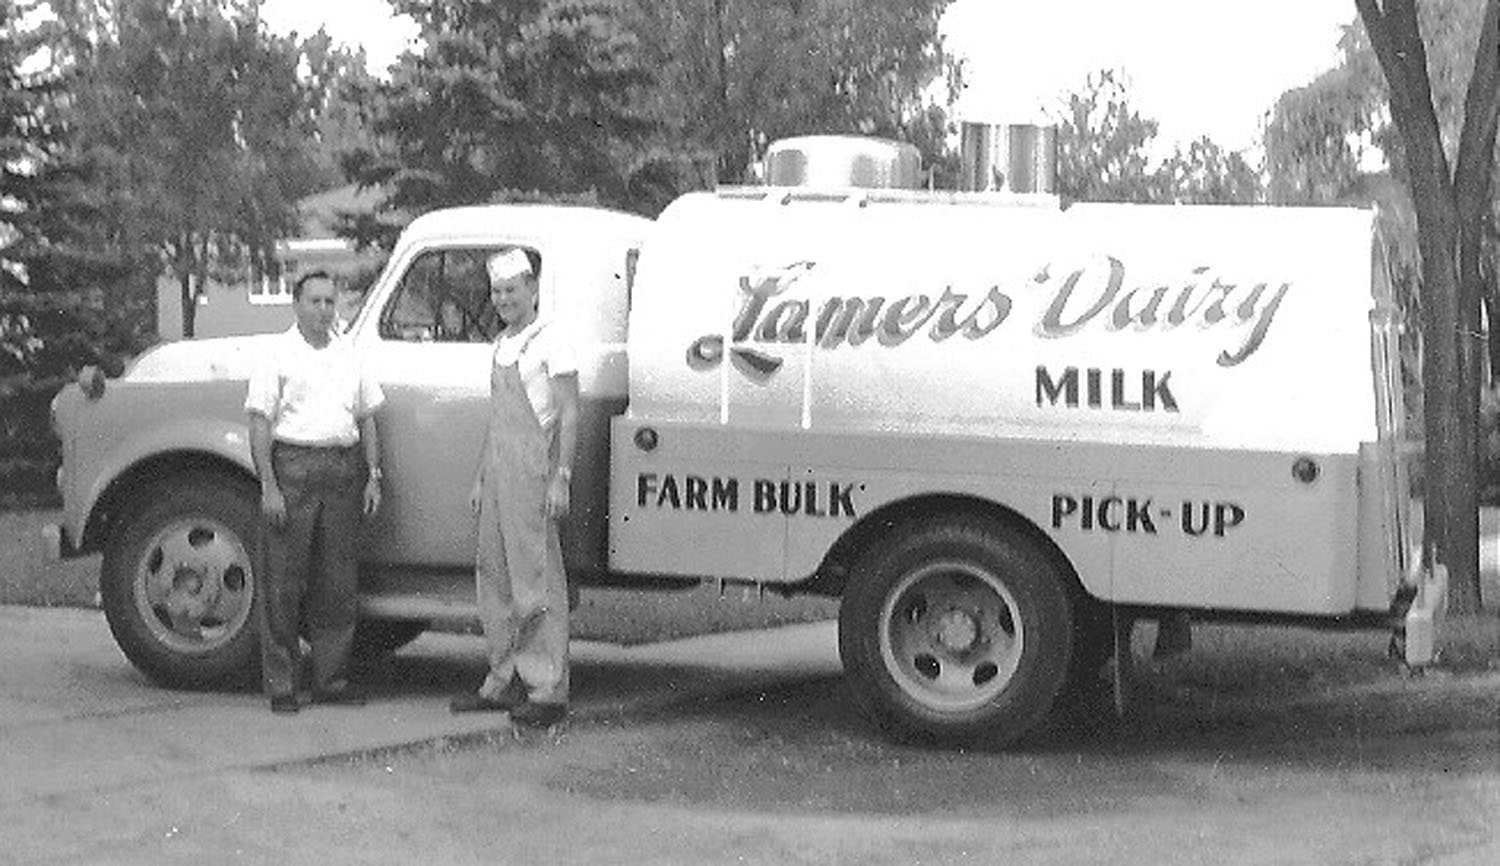 lamers dairy products, wholesale, nueske's near me, door county coffee co, famous wisconsin cheese, milk man delivery, fresh raw milk, basket gift baskets, grass fed raw milk near me,